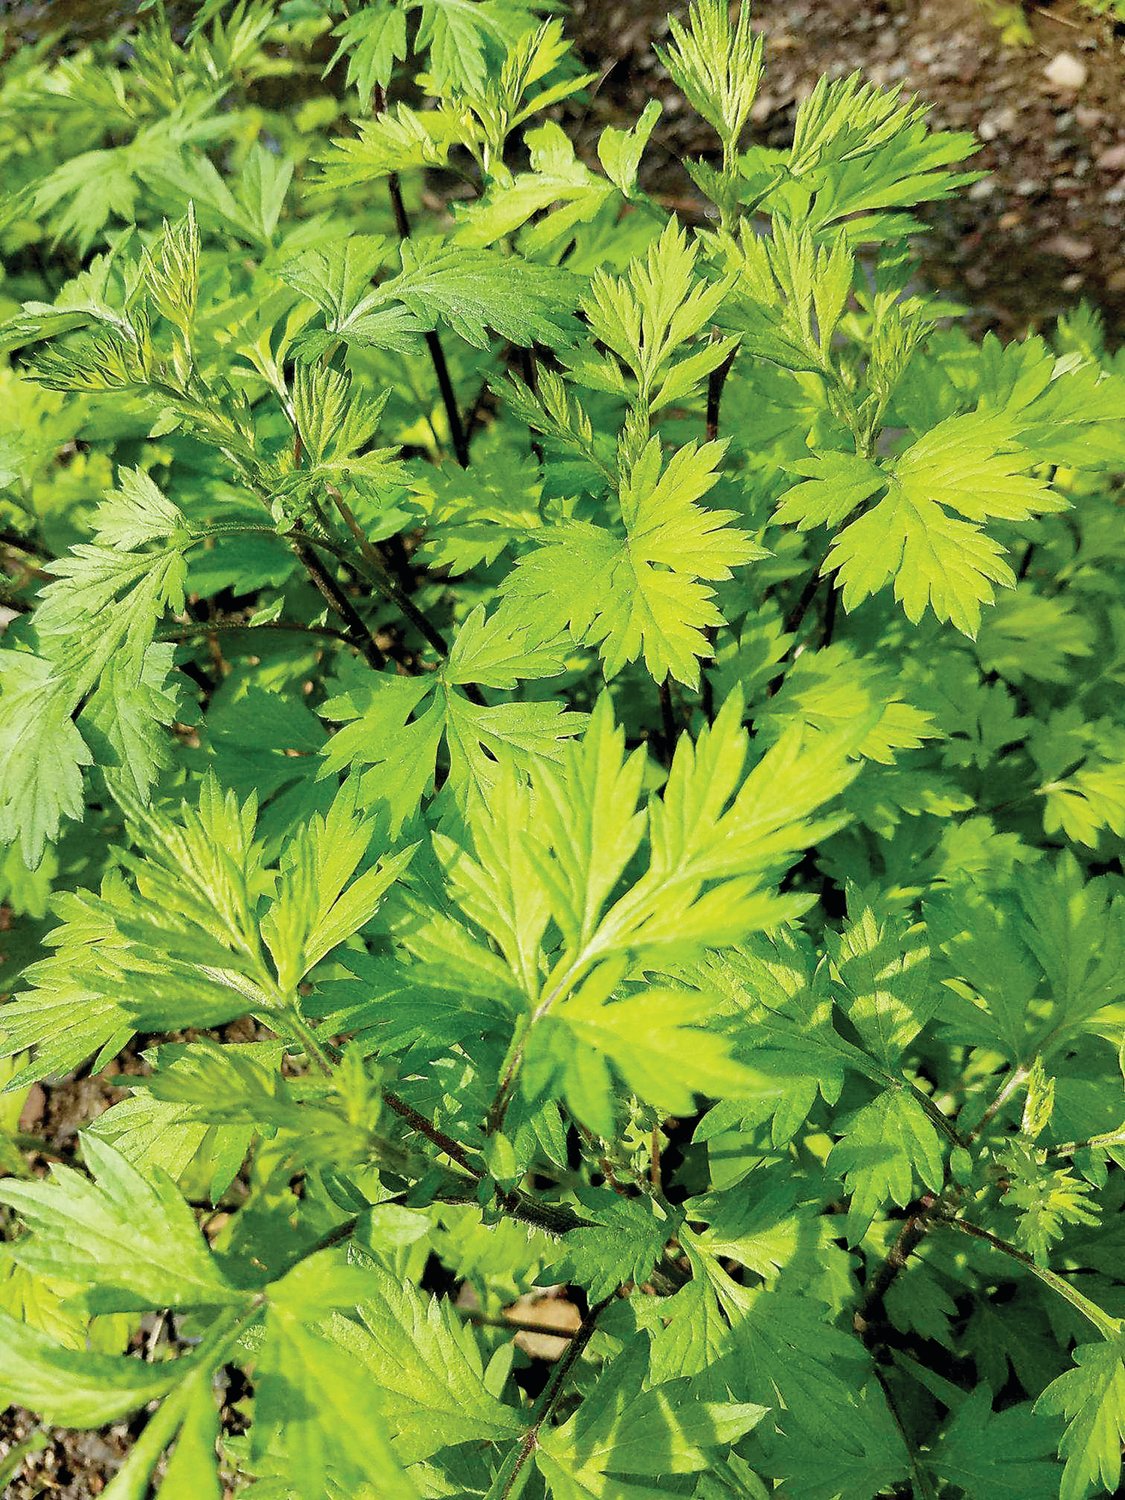 Young mugwort, an invasive plant. It has a reputation for invigorating the wayfarer